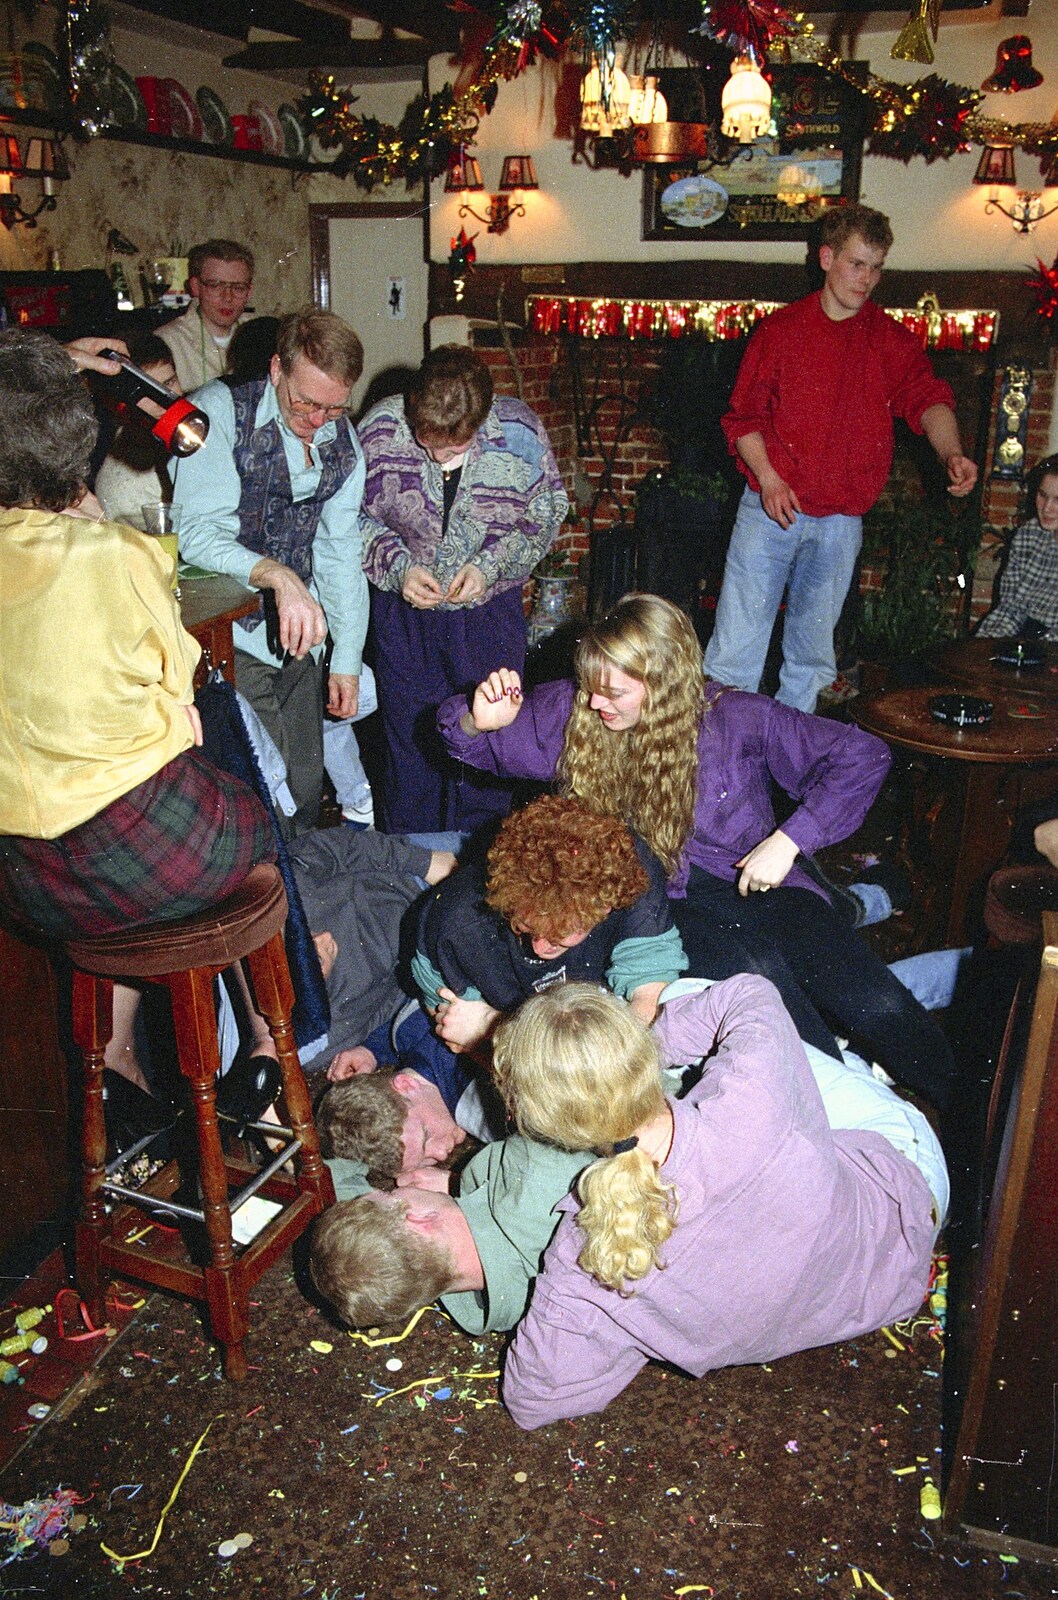 Just about everyone seems to be on the floor from New Year's Eve at the Swan Inn, Brome, Suffolk - 31st December 1994